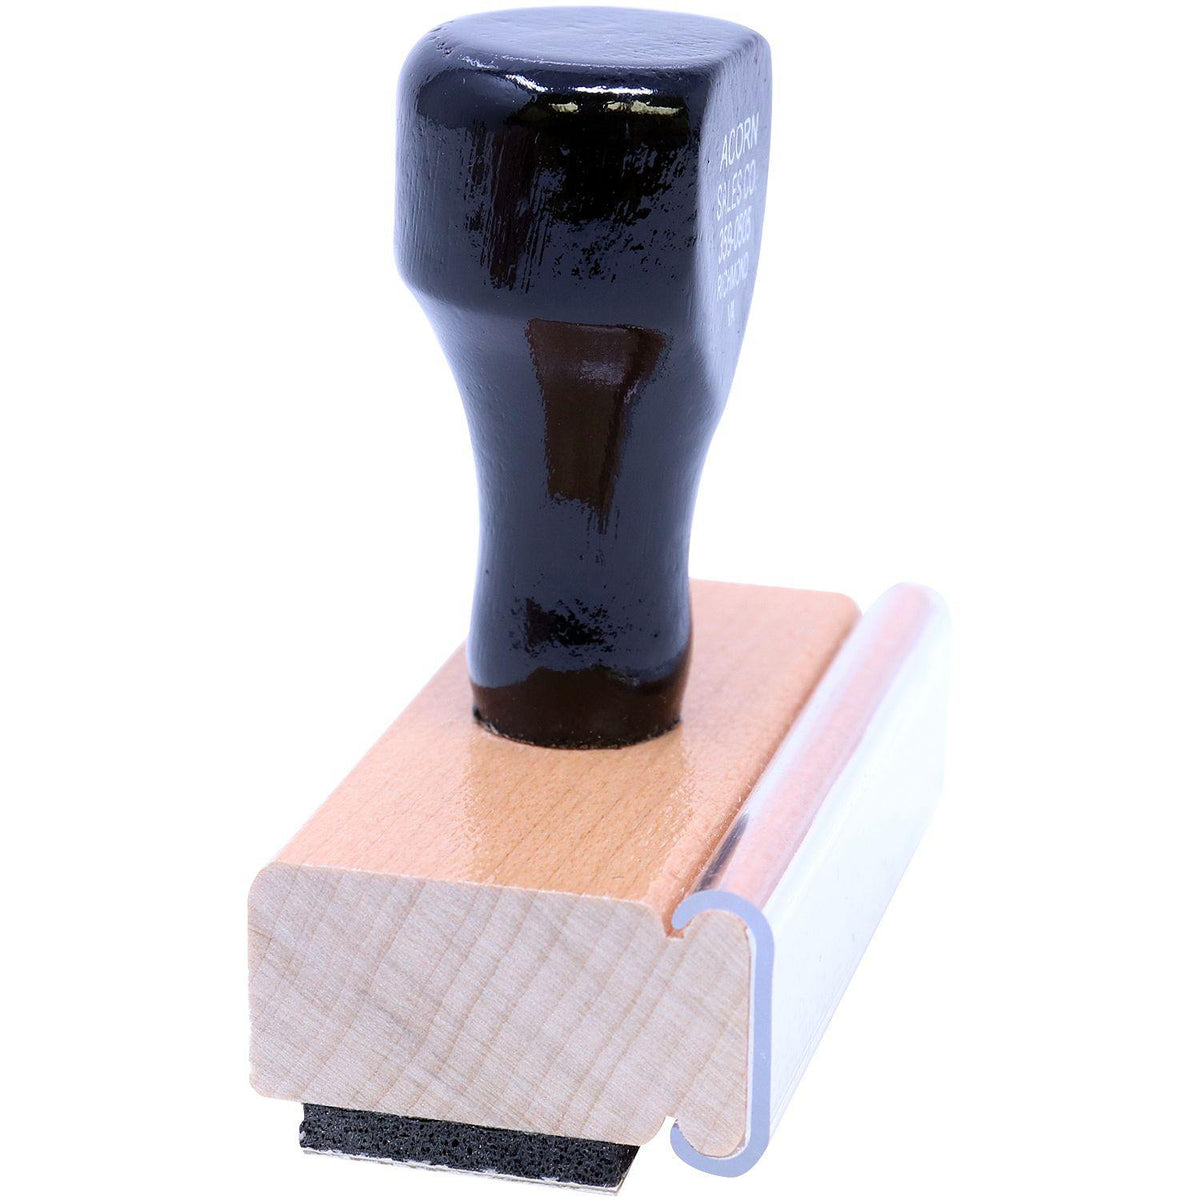 Side View of Large Privileged Rubber Stamp at an Angle